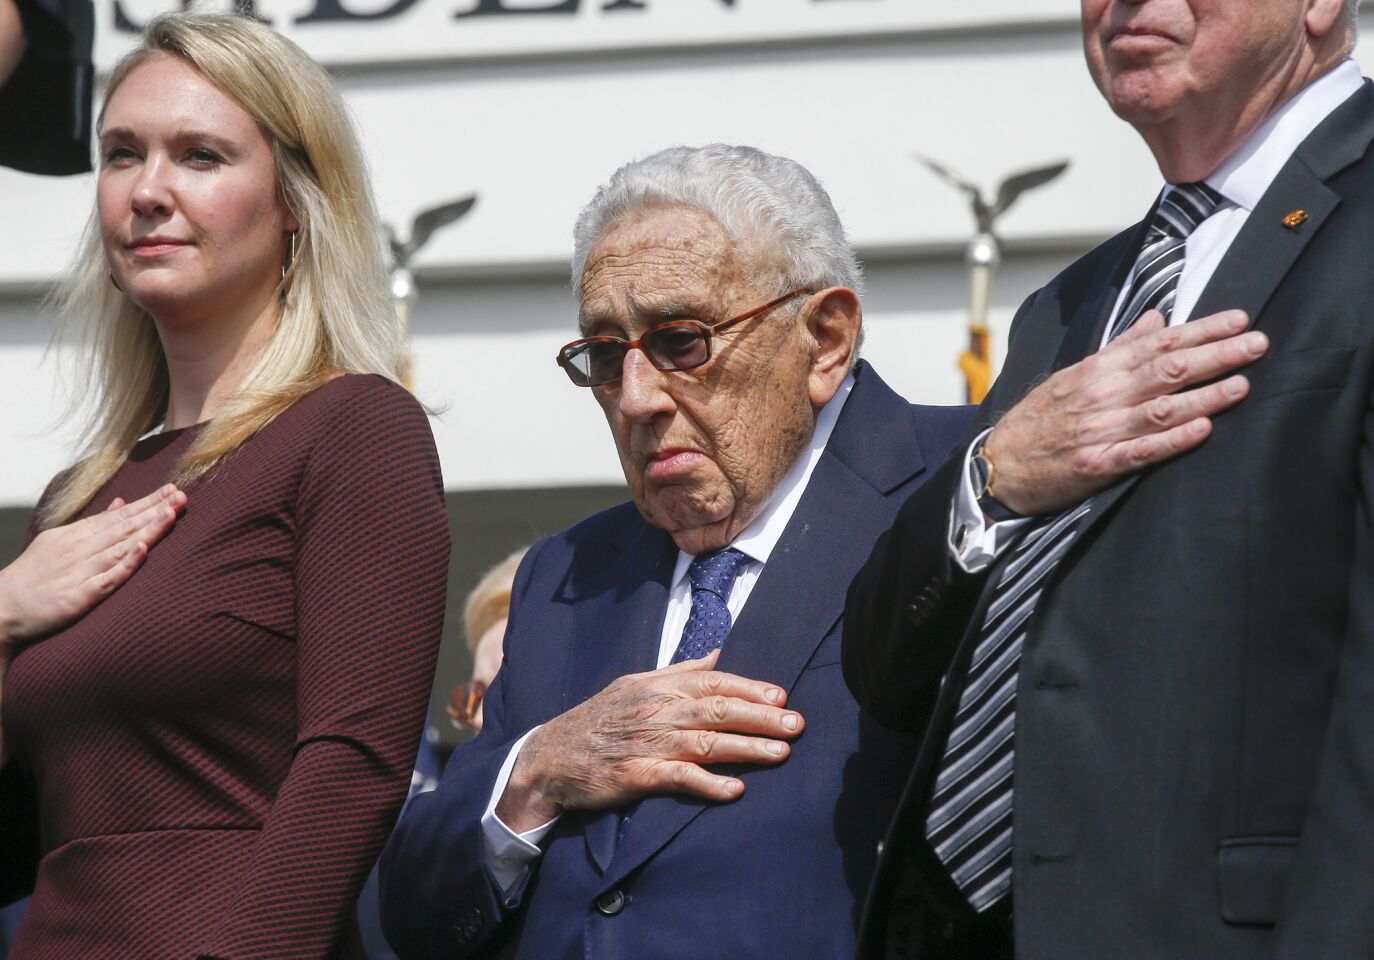 Richard Nixon's graddaughter Melanie Eisenhower and former Secretary of State Henry Kissinger join family, friends and former staff of the late president during opening ceremonies for the newly renovated Nixon Presidential Library and Museum in Yorba Linda.